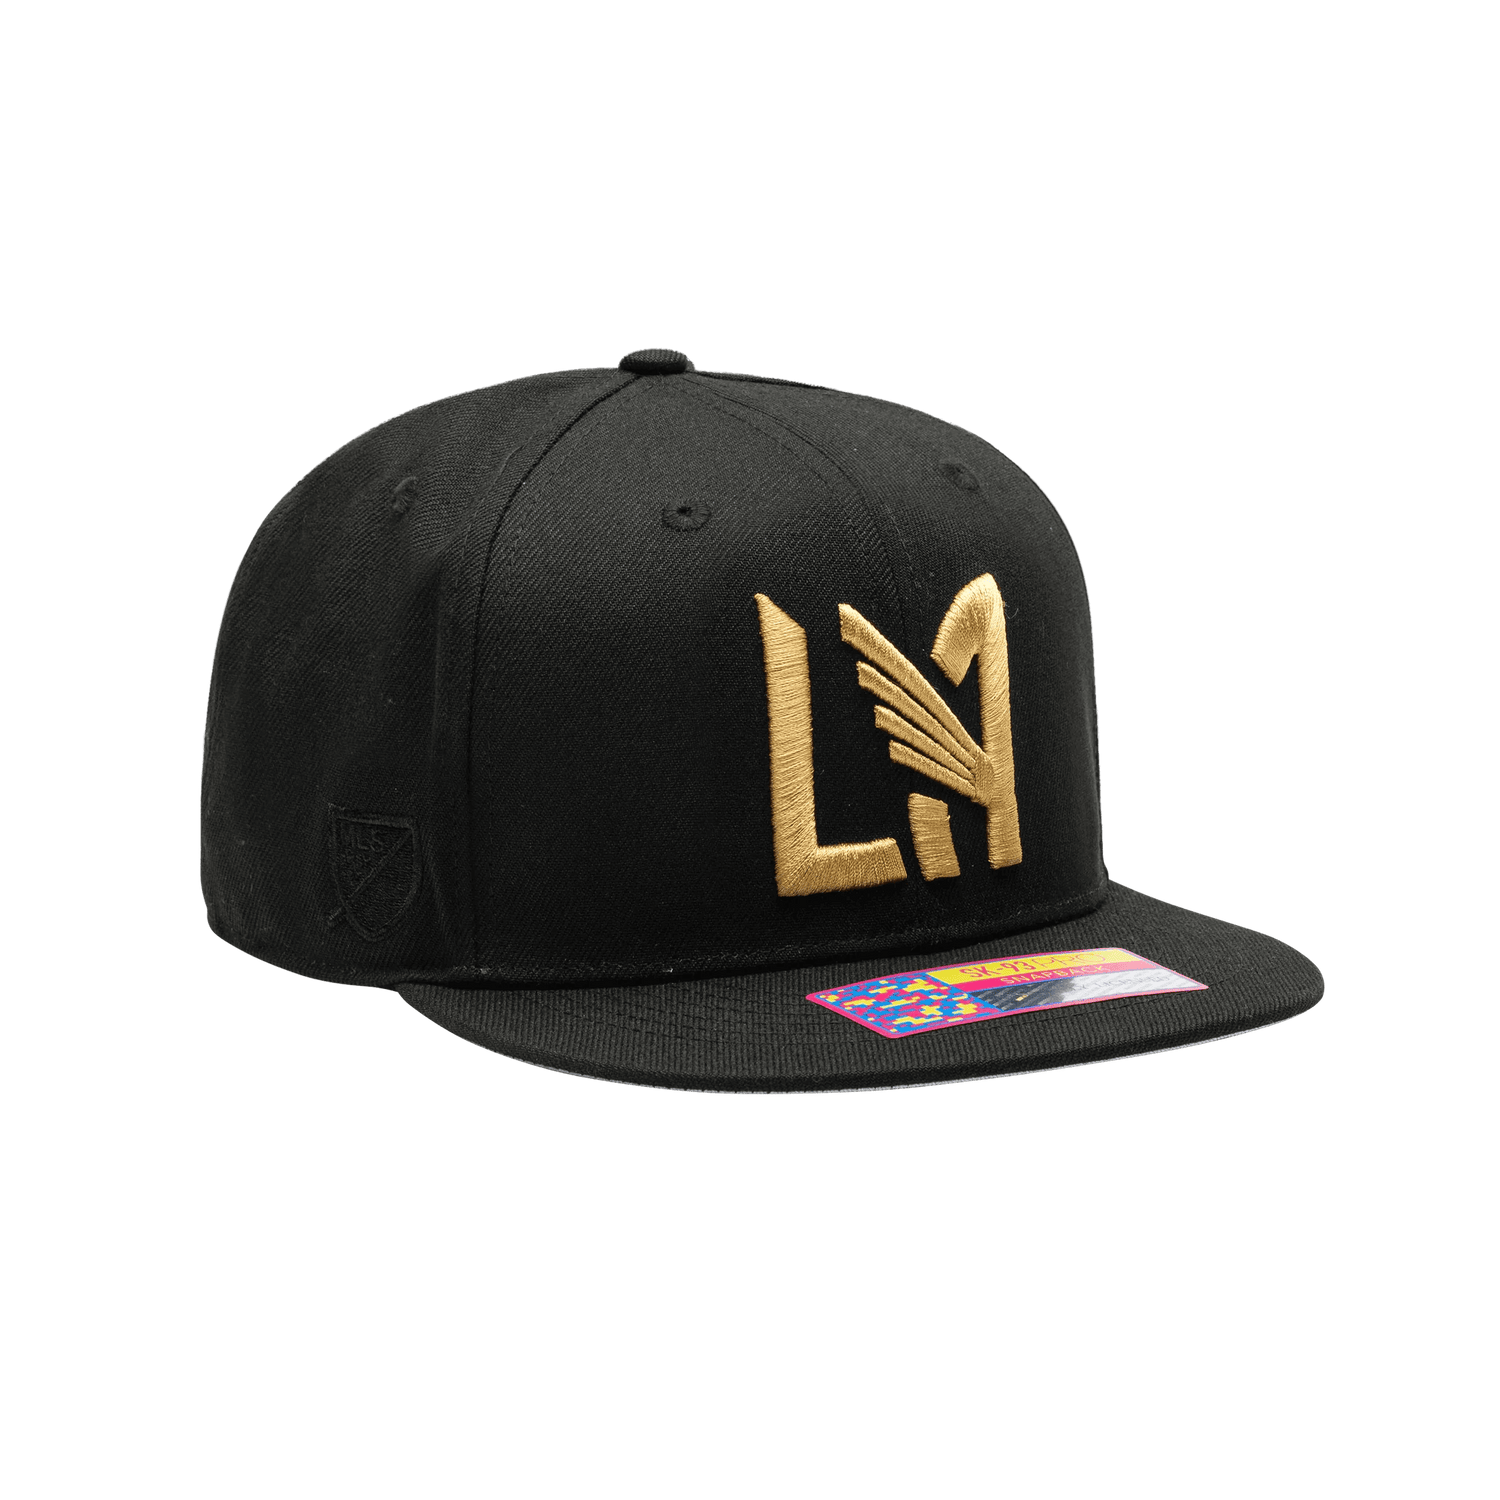 FI Collection LAFC Dawn Snapback Hat (Lateral - Side 2)